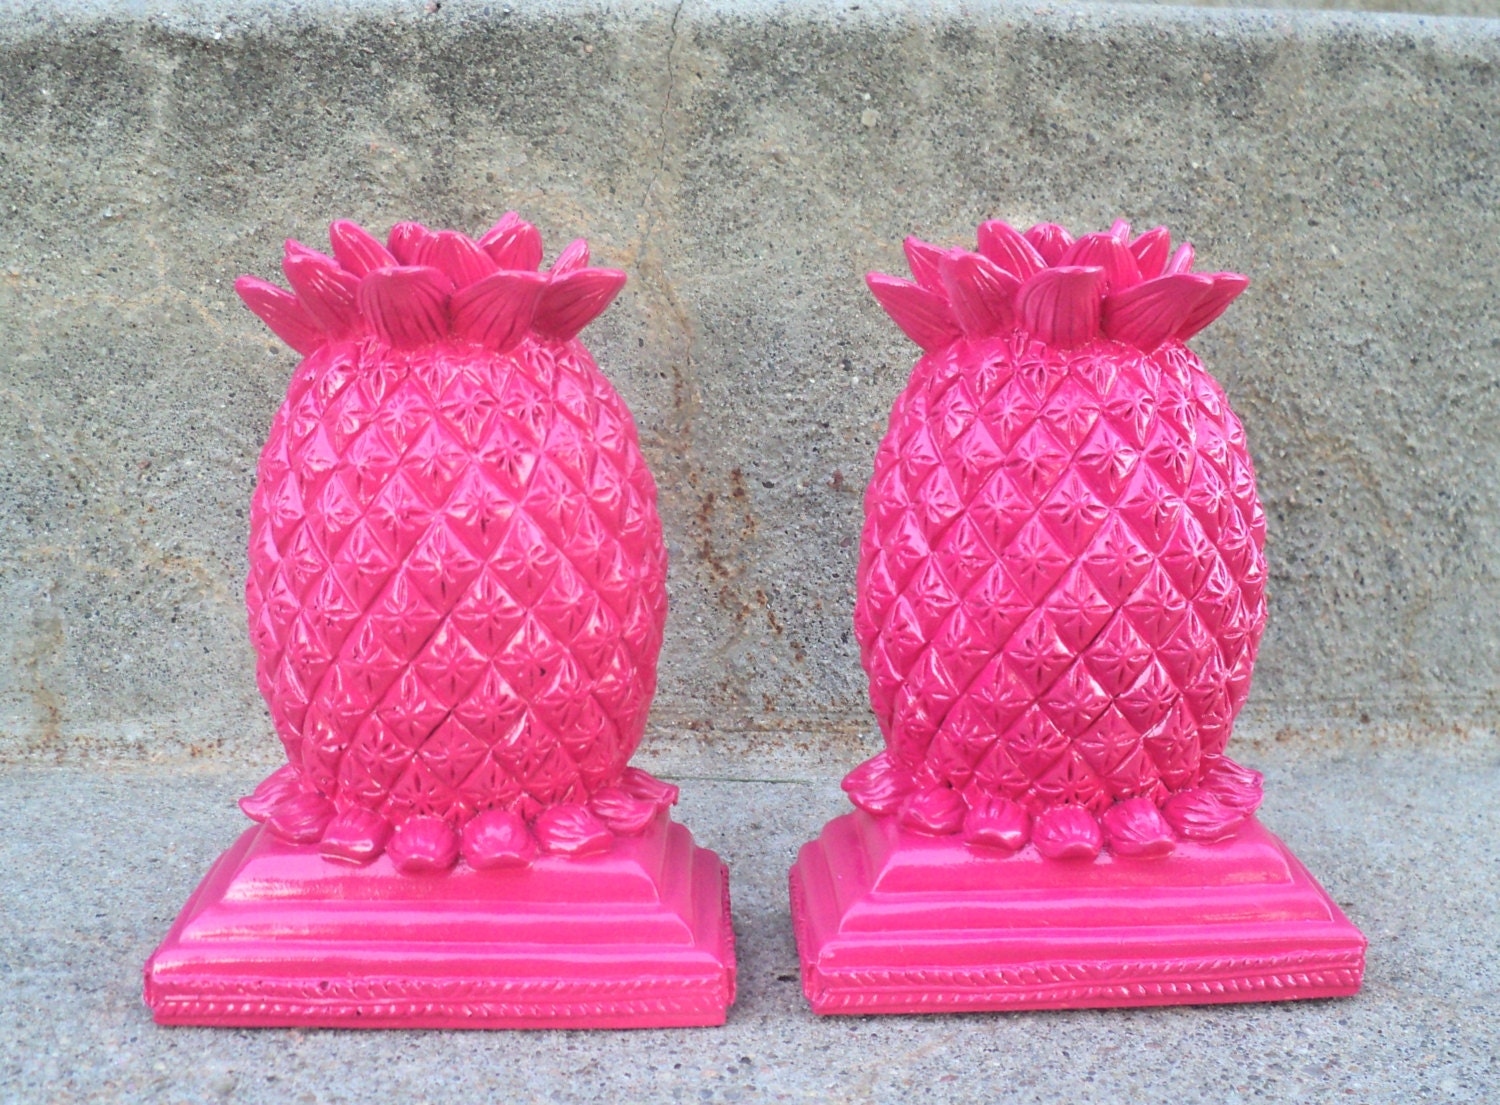 Hot Pink Pineapple Bookend Bright Girly Home Decor